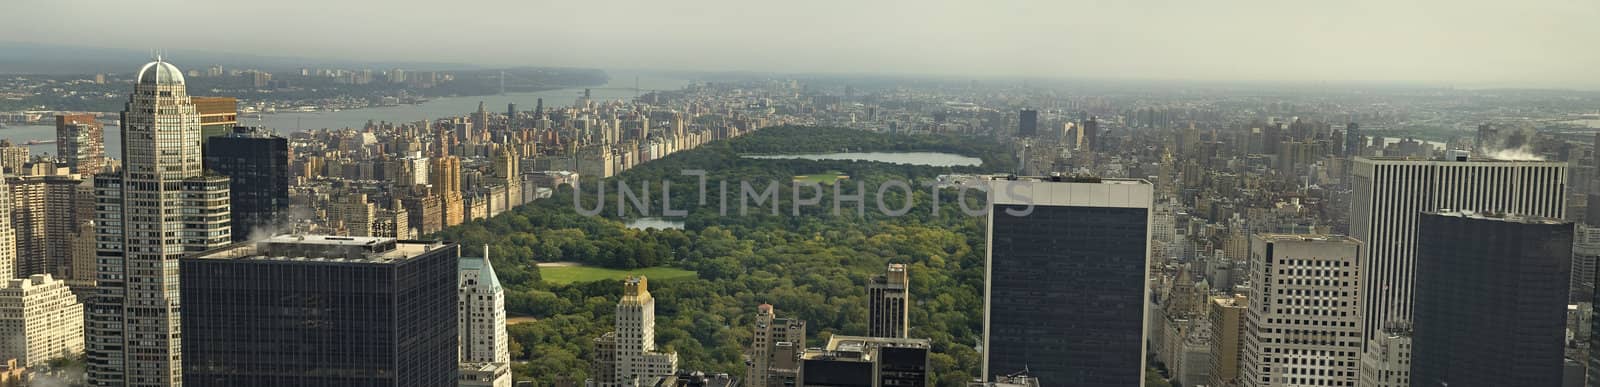 central park aerial panorama photo, fog in distance